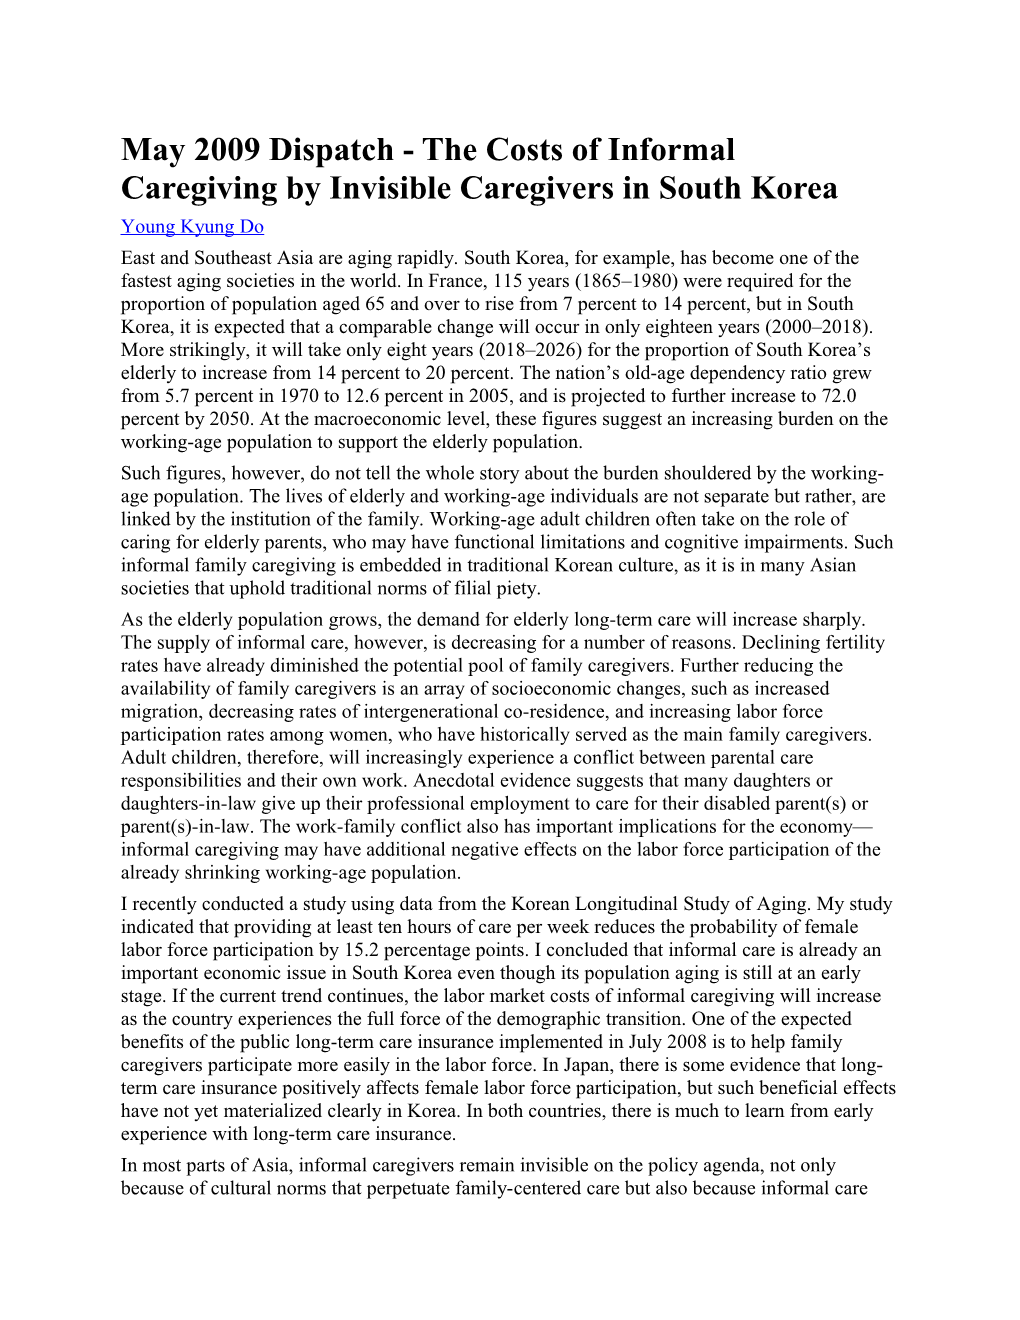 May 2009 Dispatch - the Costs of Informal Caregiving by Invisible Caregivers in South Korea